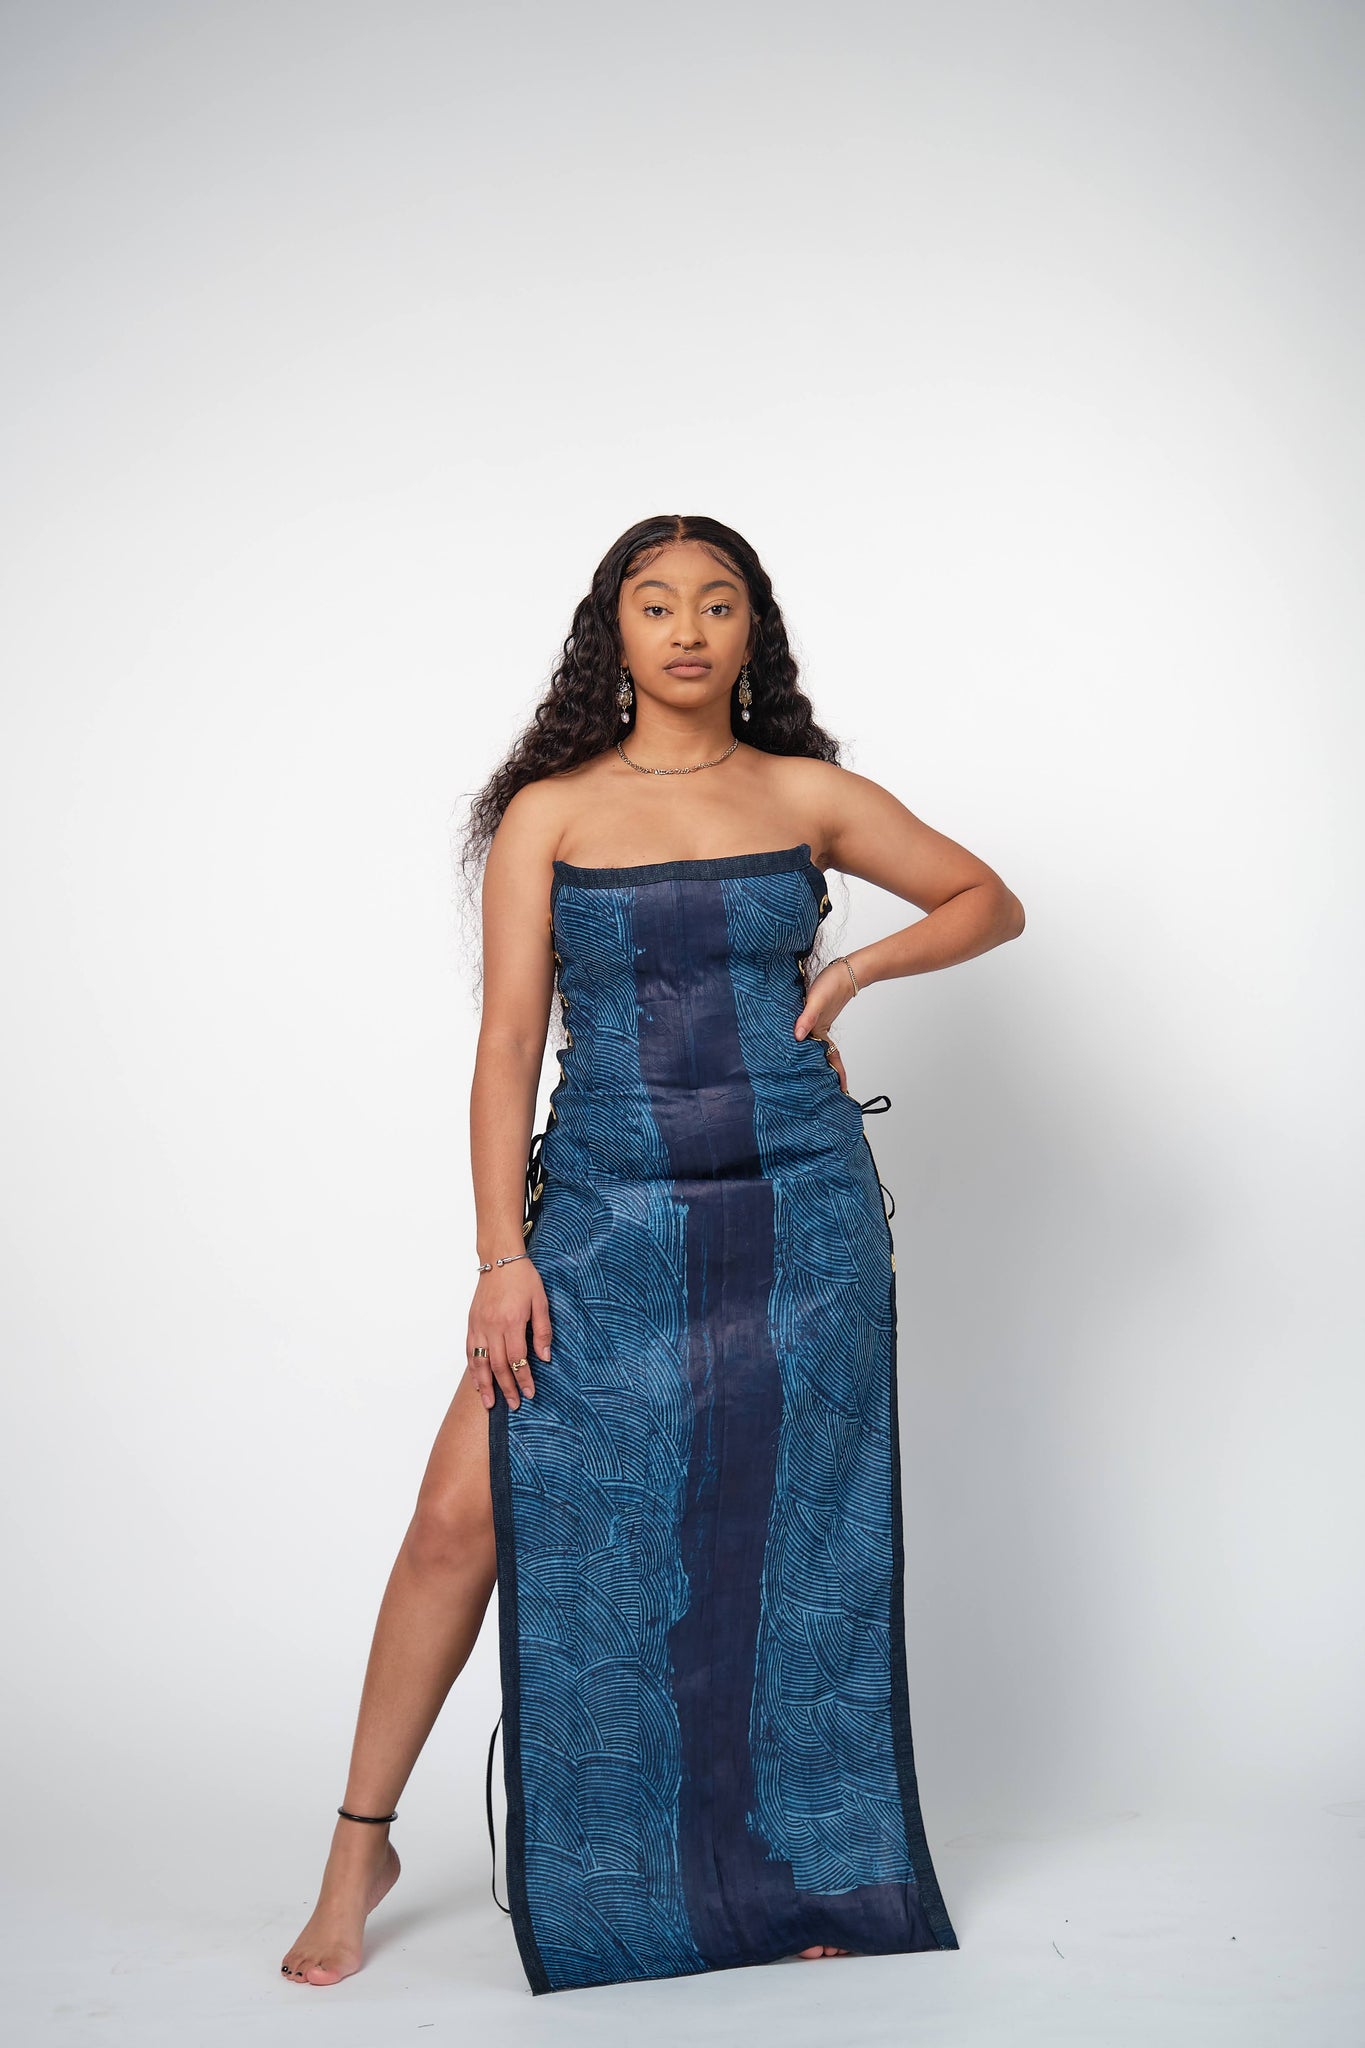 Indigo tie dye dress with rivets for side closures